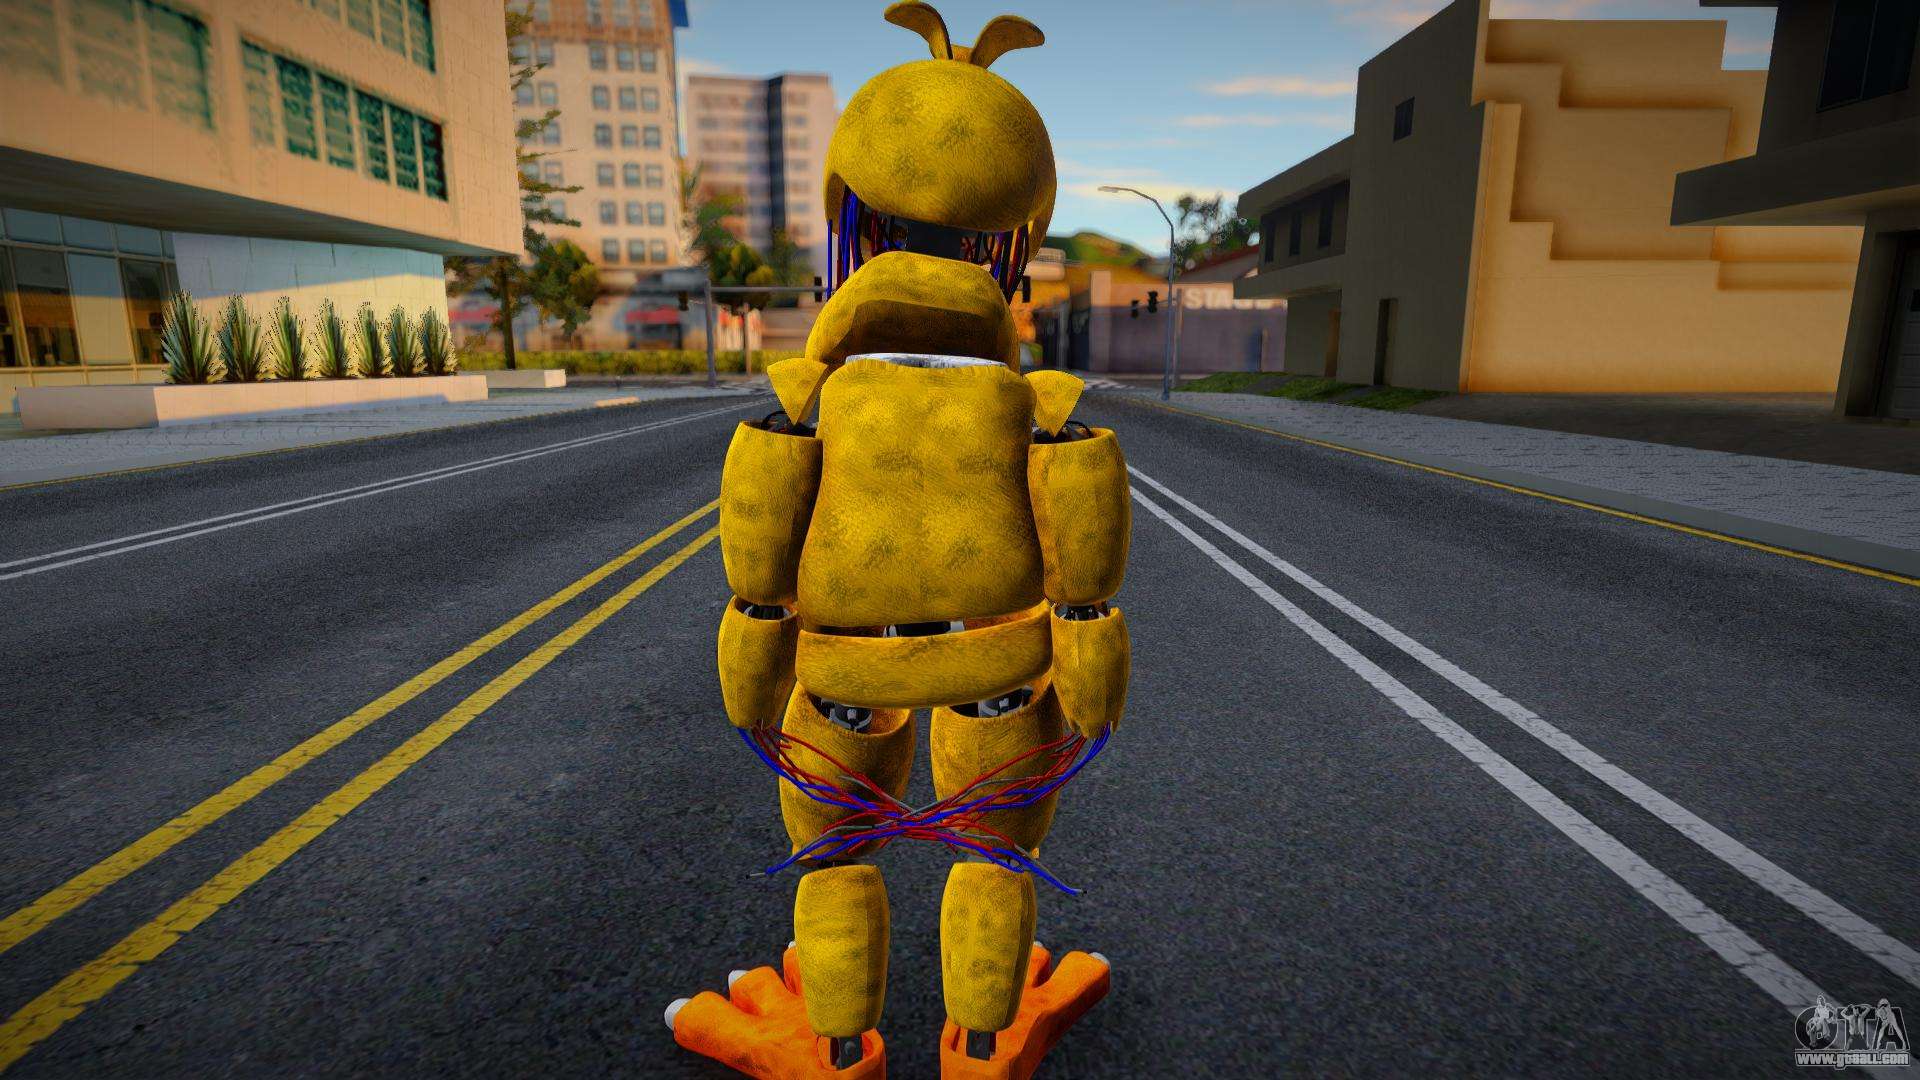 GTA San Andreas Withered chica fnaf 2 Mod 